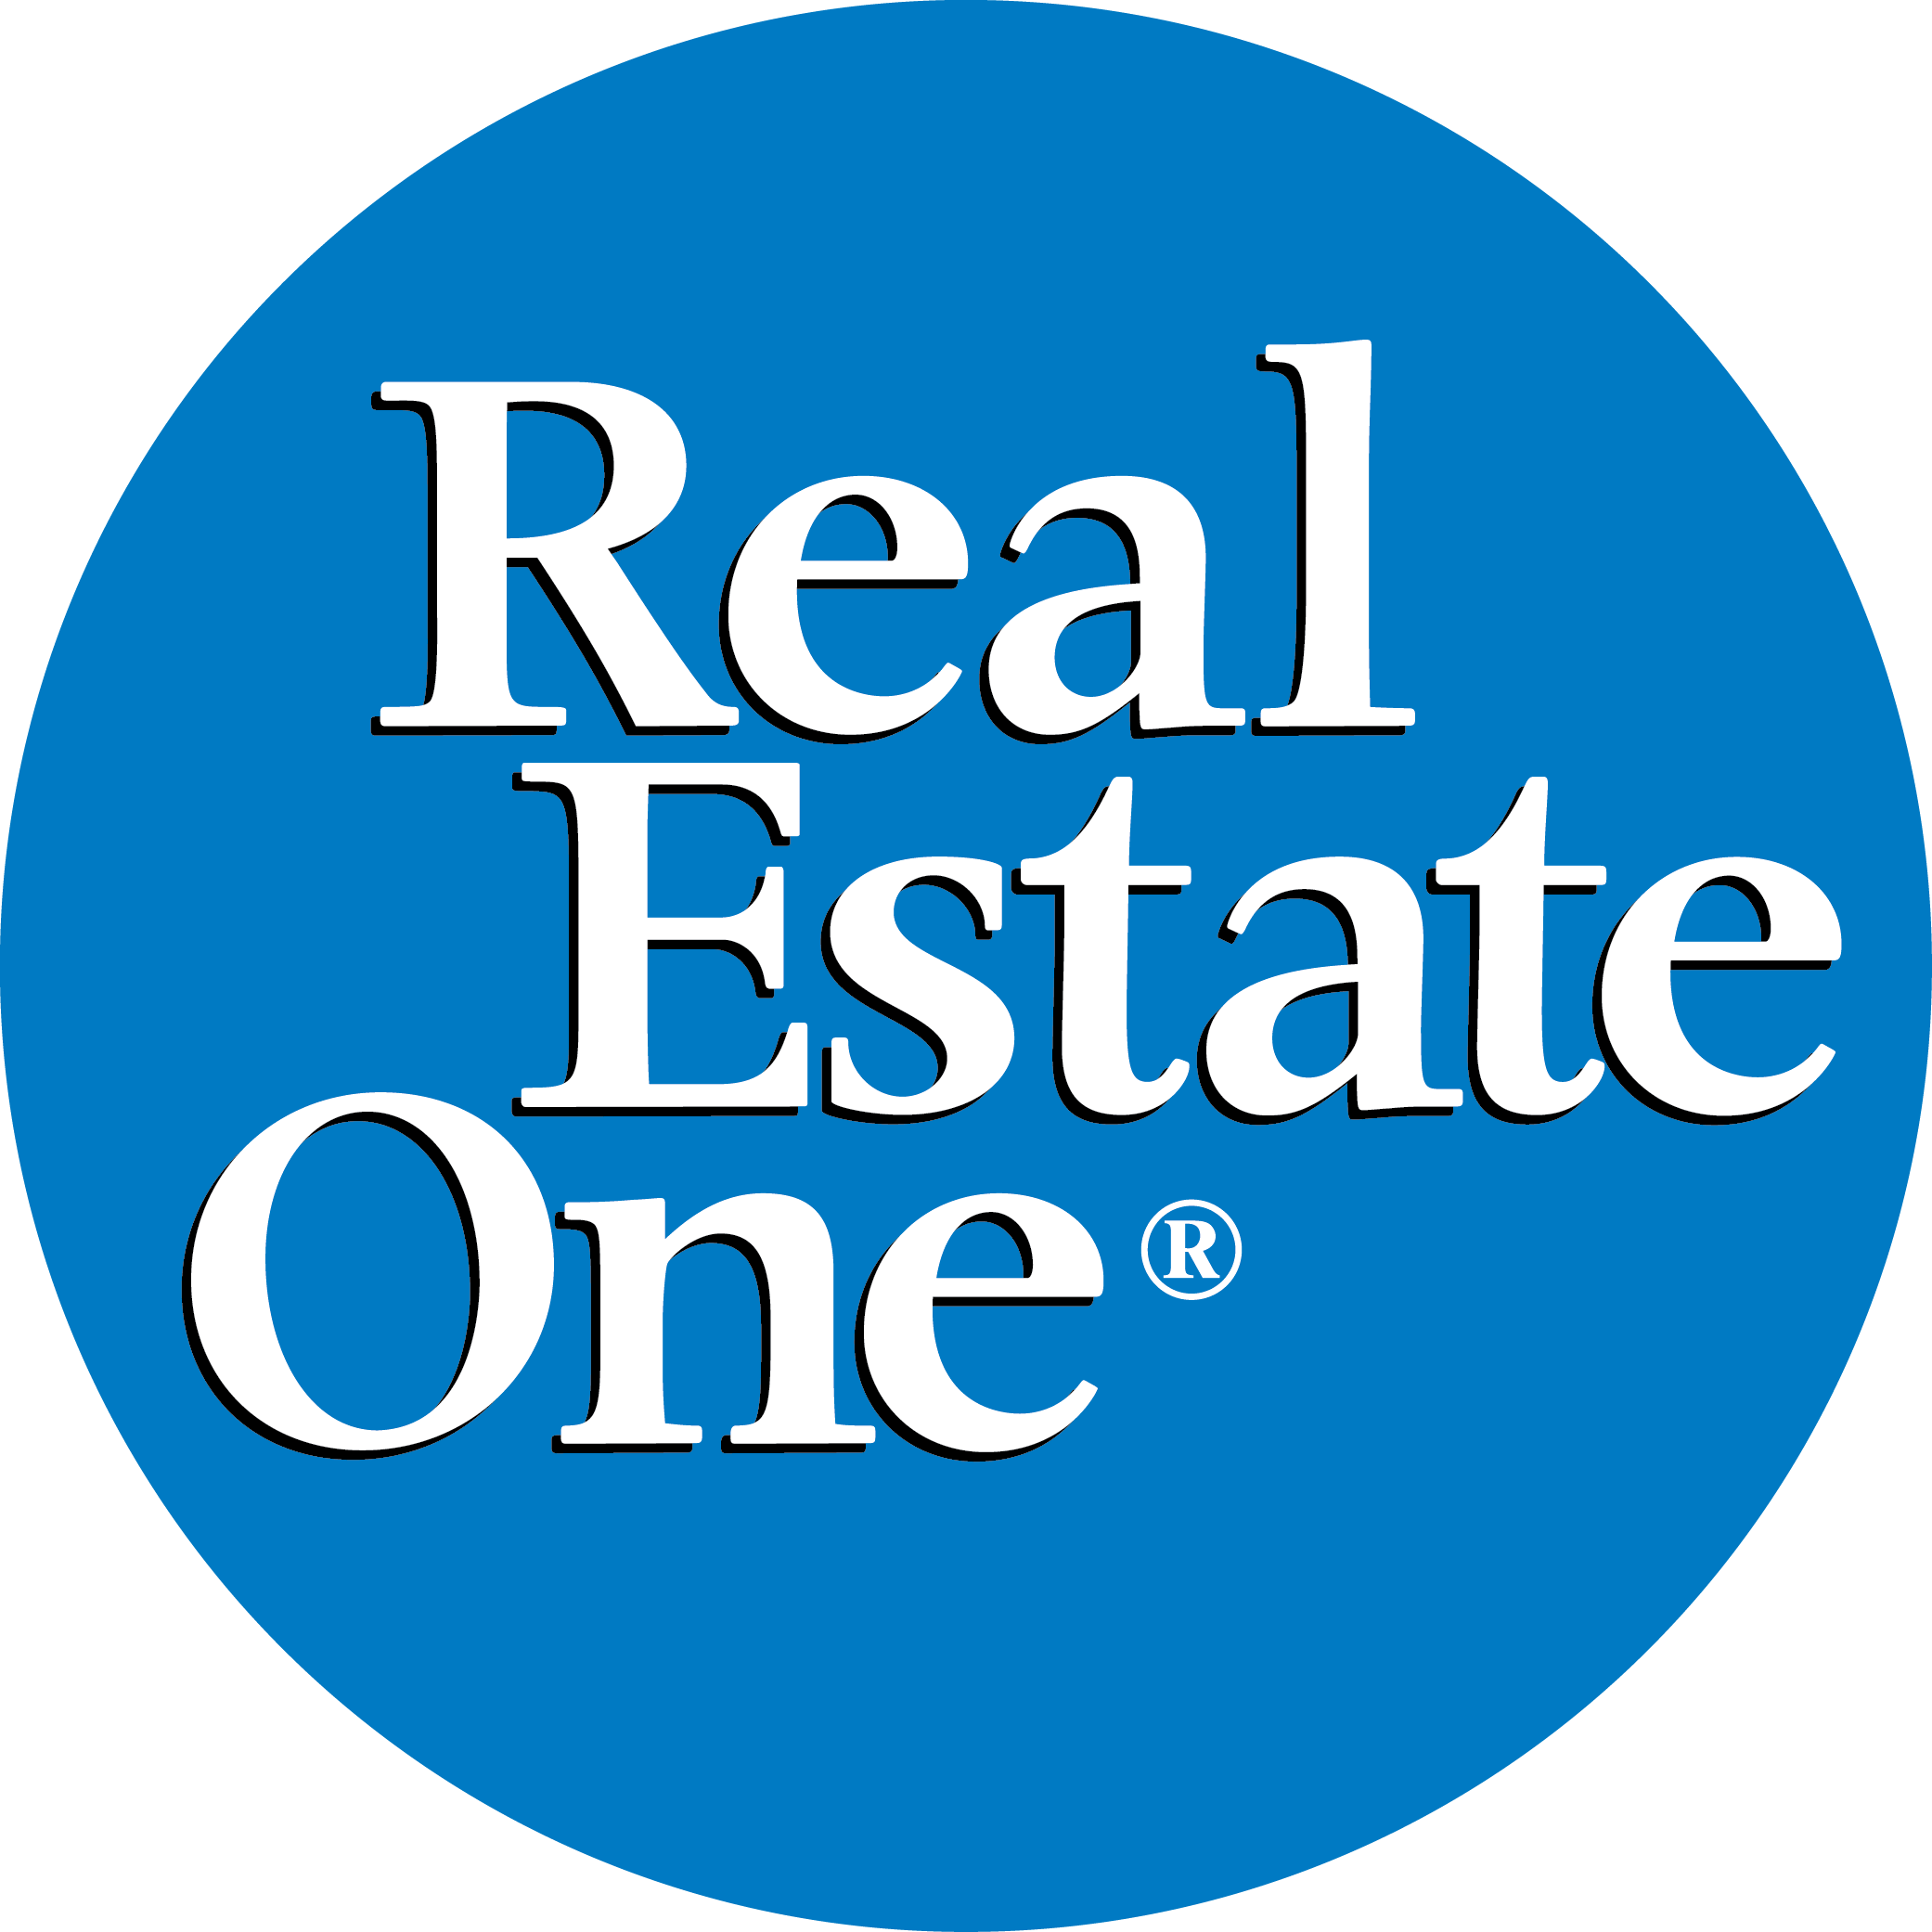 Corey Mims | Real Estate One Photo